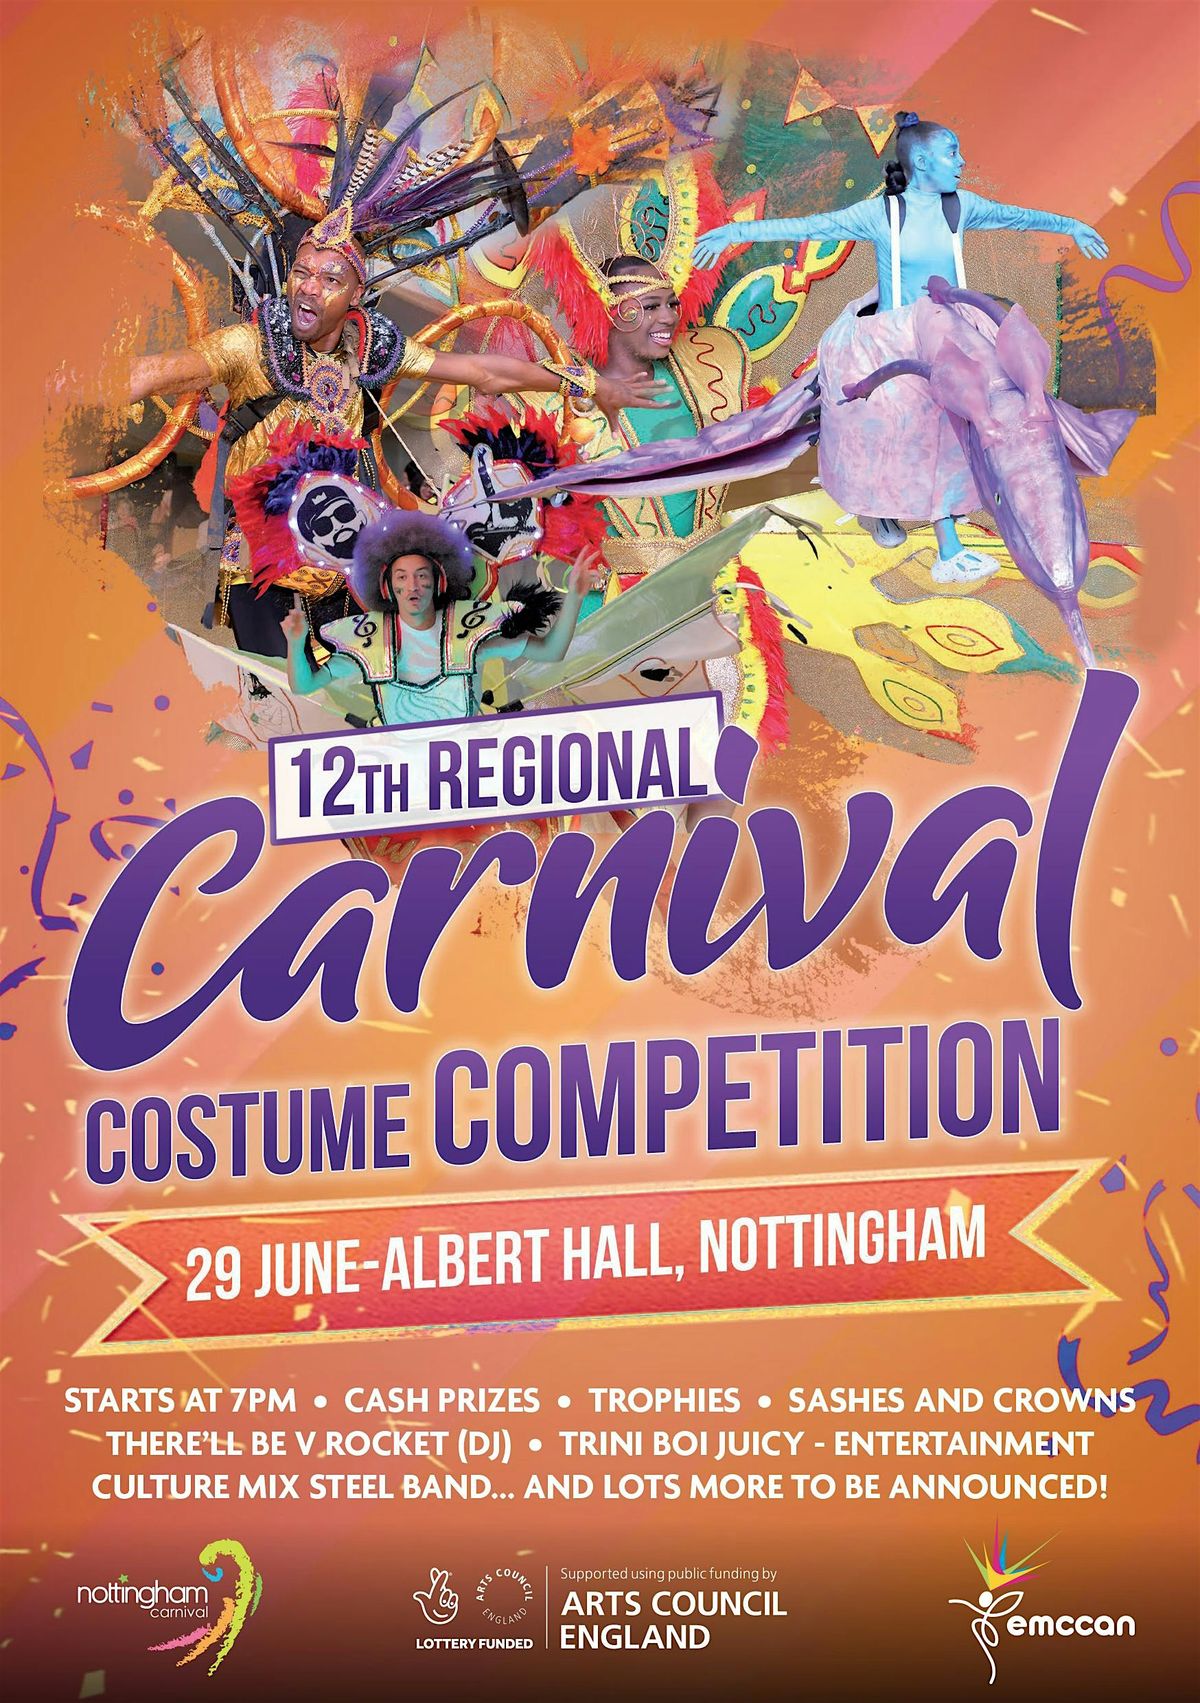 Regional Carnival Costume Competition